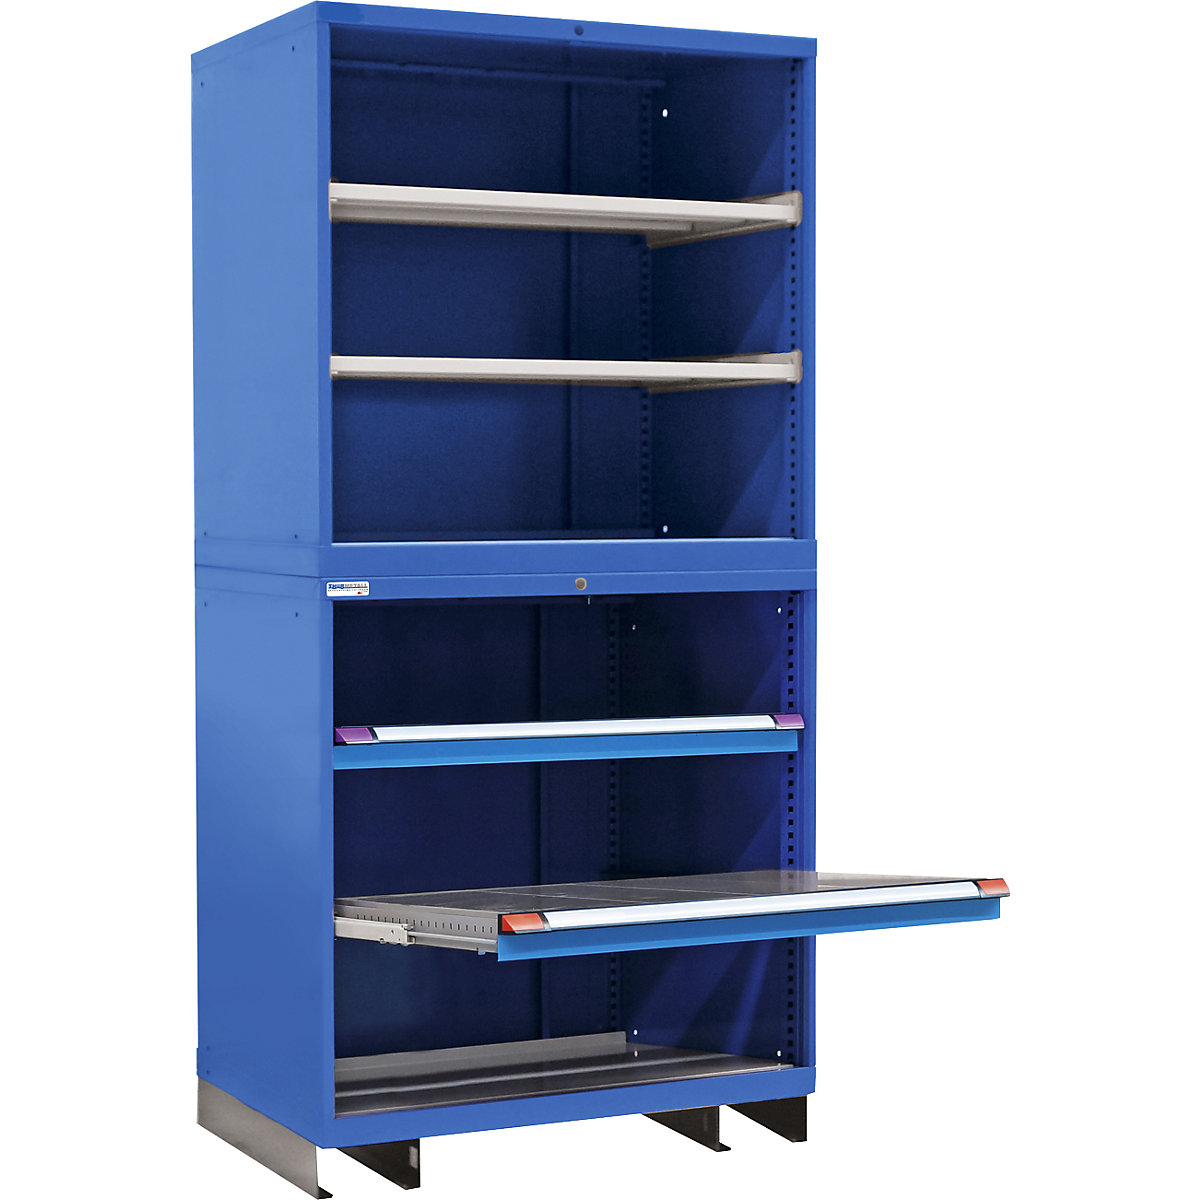 Modular cupboard system, 2 shelves, 2 pull-out shelves, max. load 75 kg, HxWxD 2100 x 1005 x 695 mm-10